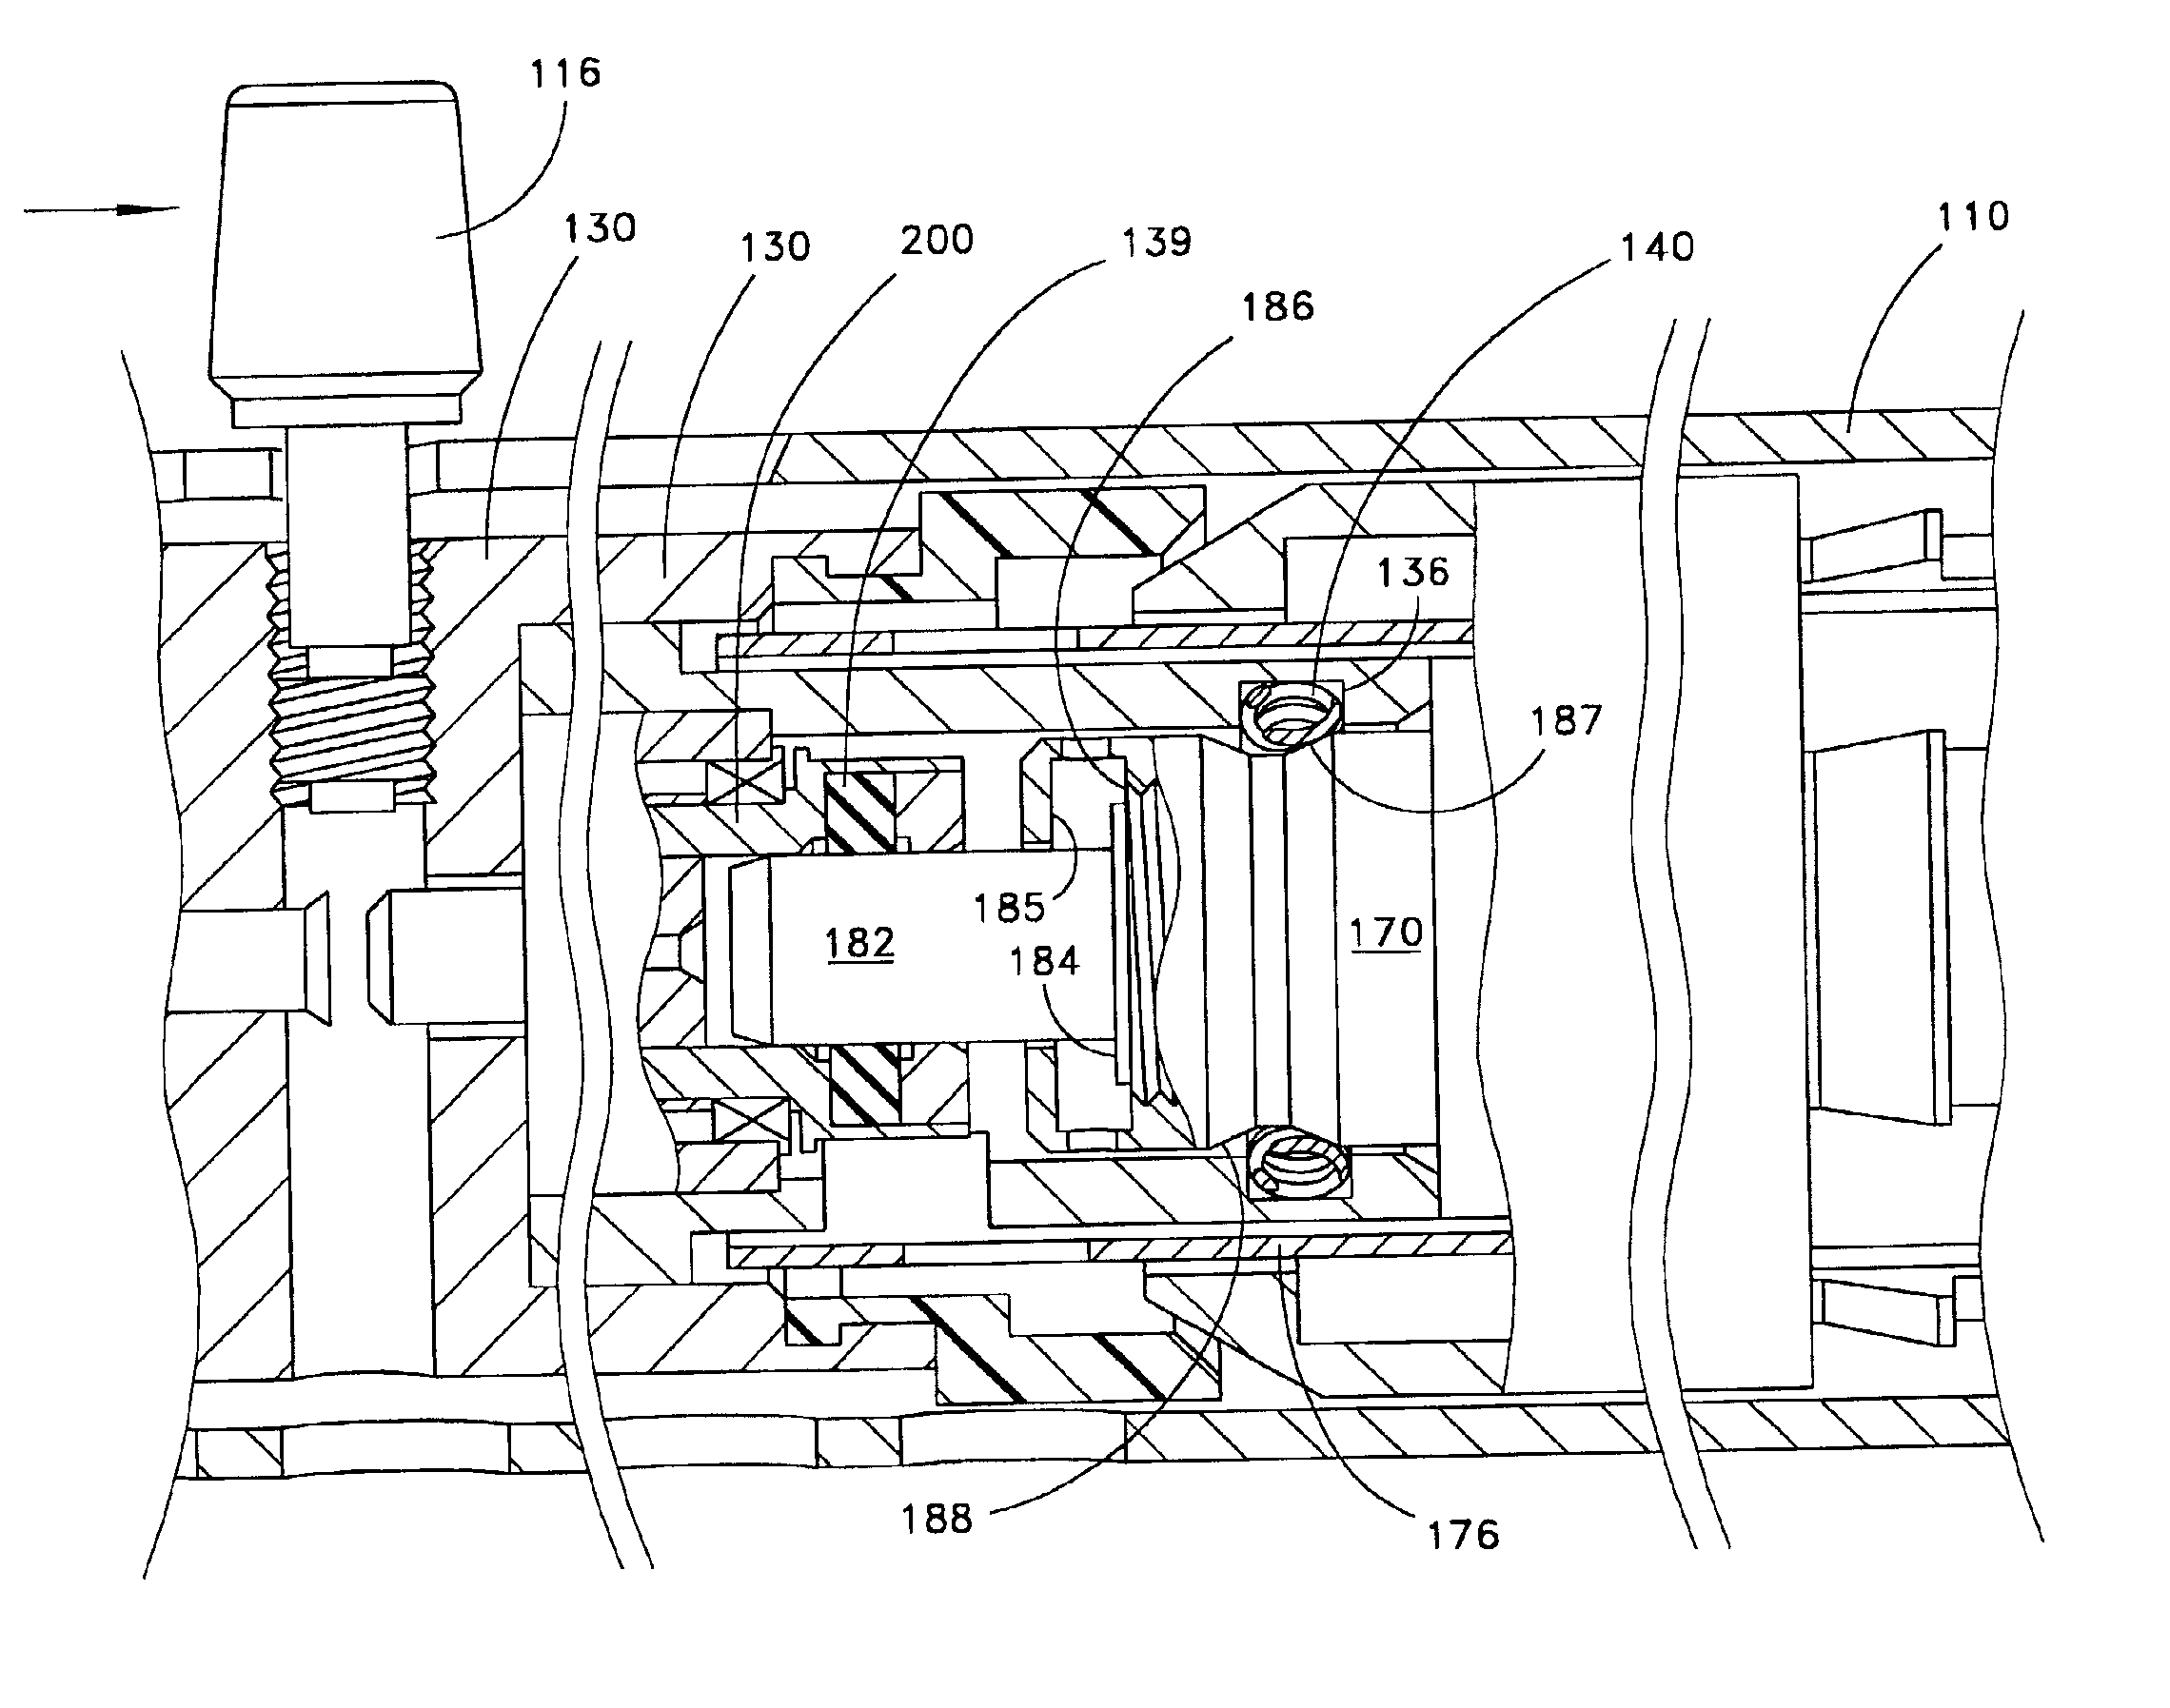 Self-indexing coupling for rotational angioplasty device